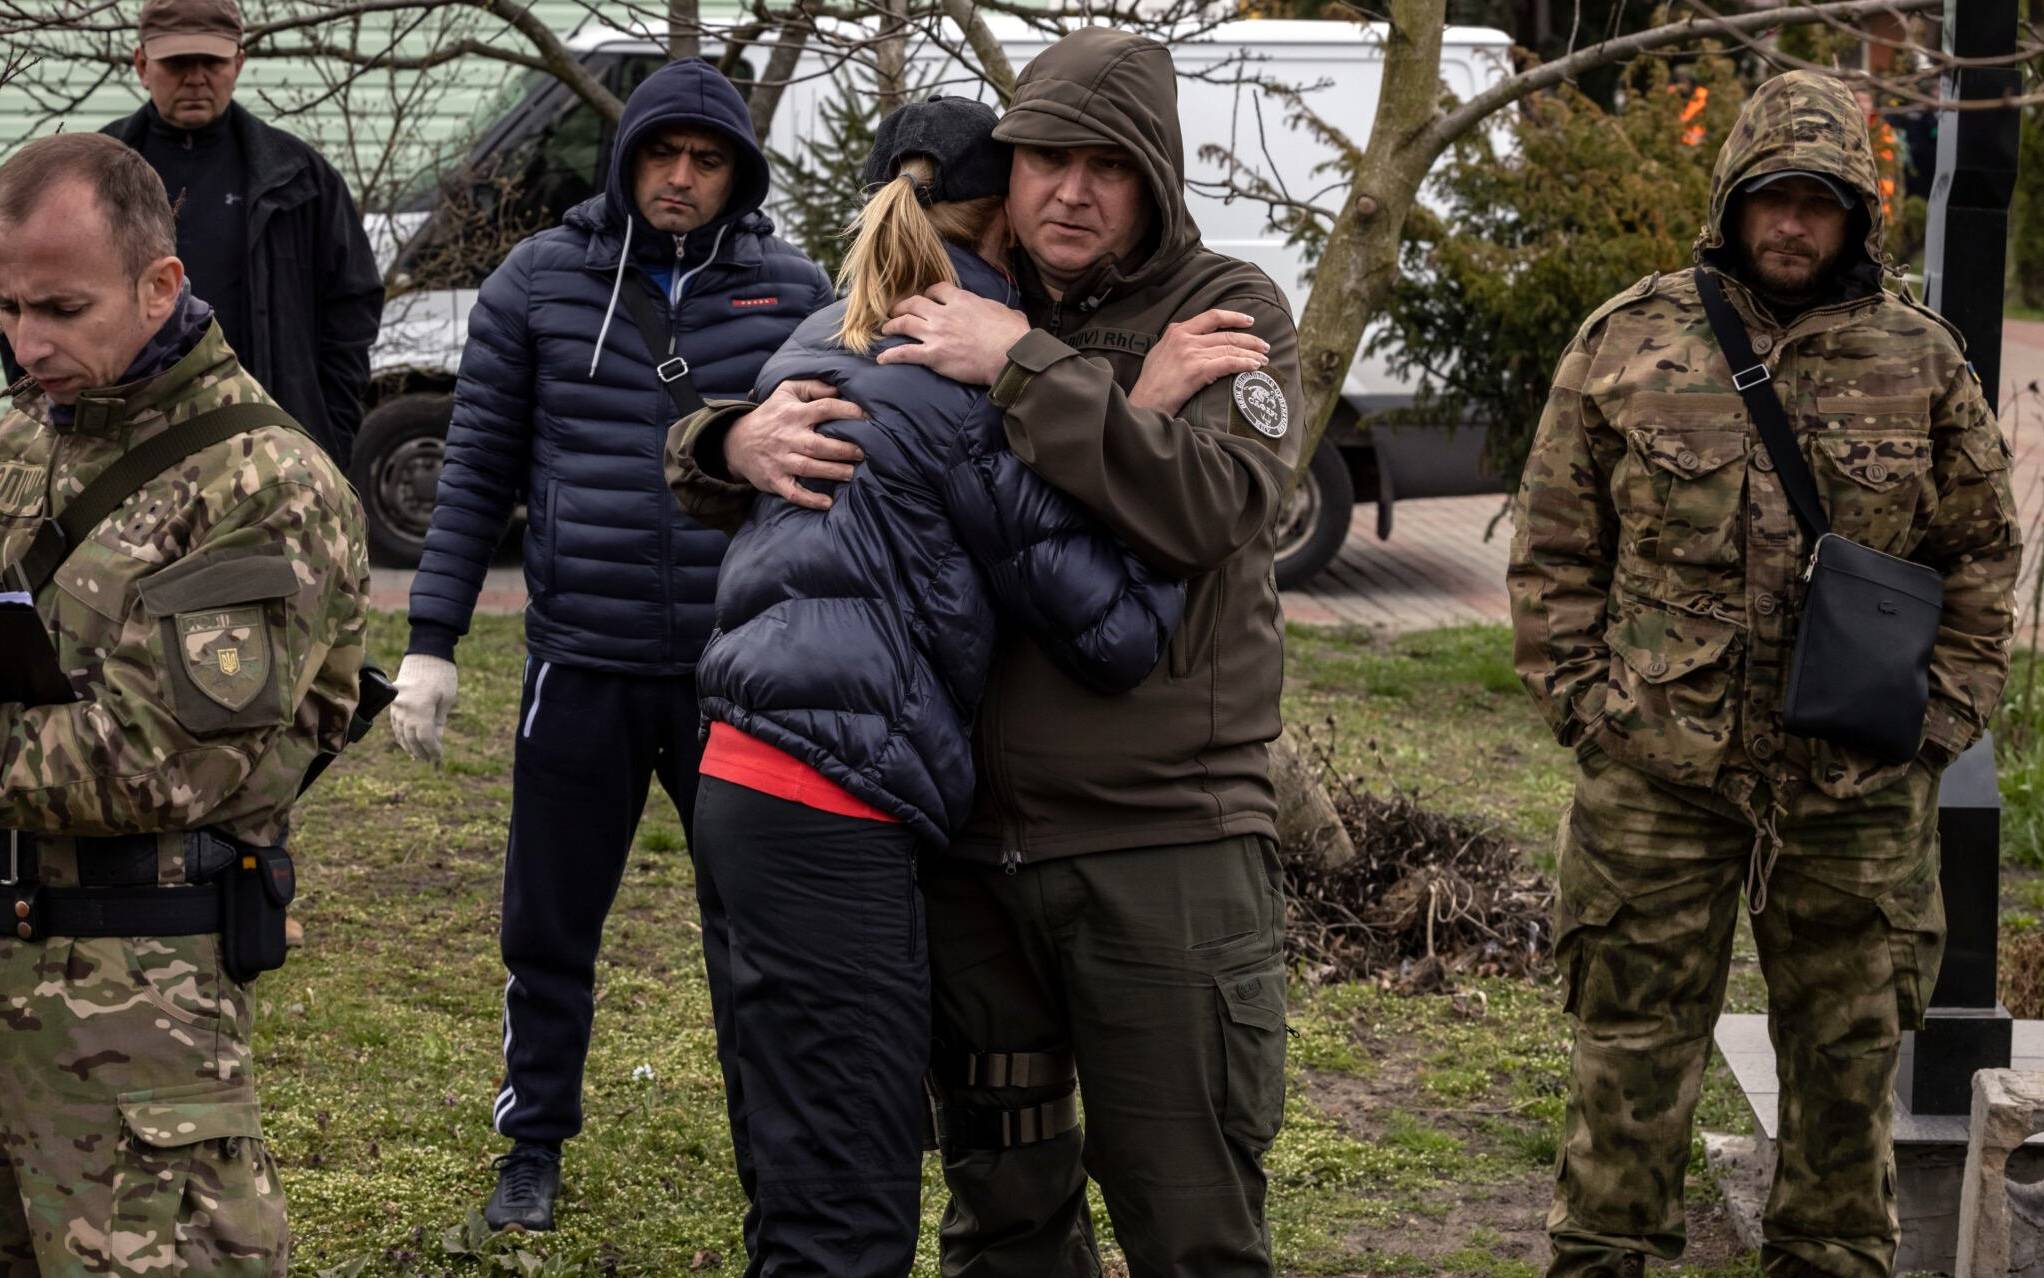 Relatives react past the exhumed body of Gostomel's mayor Yuriy Prylypko, who was buried near a church in Gostomel village, Kyiv region, on April 12, 2022. - Prylypko, 62, was killed on March 7 after Russian forces rolled into the Kyiv commuter town he managed. The municipal council said he was shot dead whilst "handing out bread to the hungry and medicine to the sick". (Photo by FADEL SENNA / AFP)